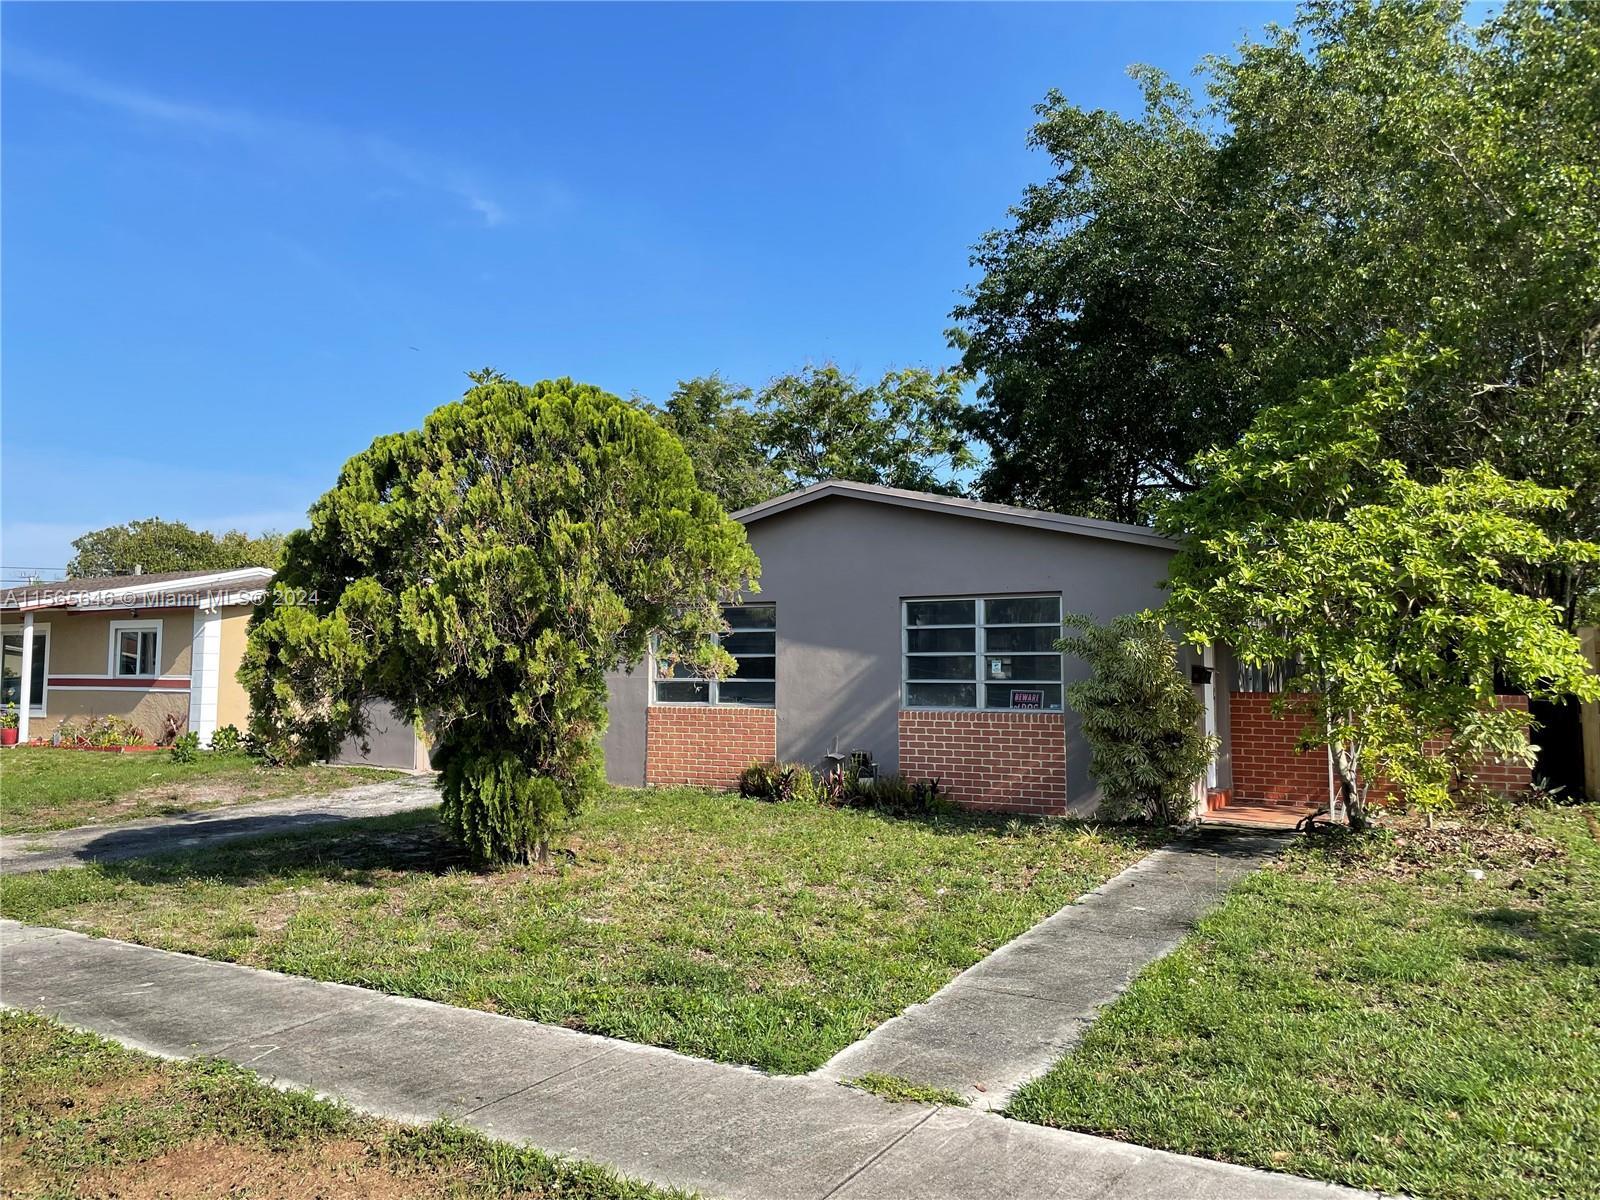 Photo of 6281 NW 13th St in Sunrise, FL